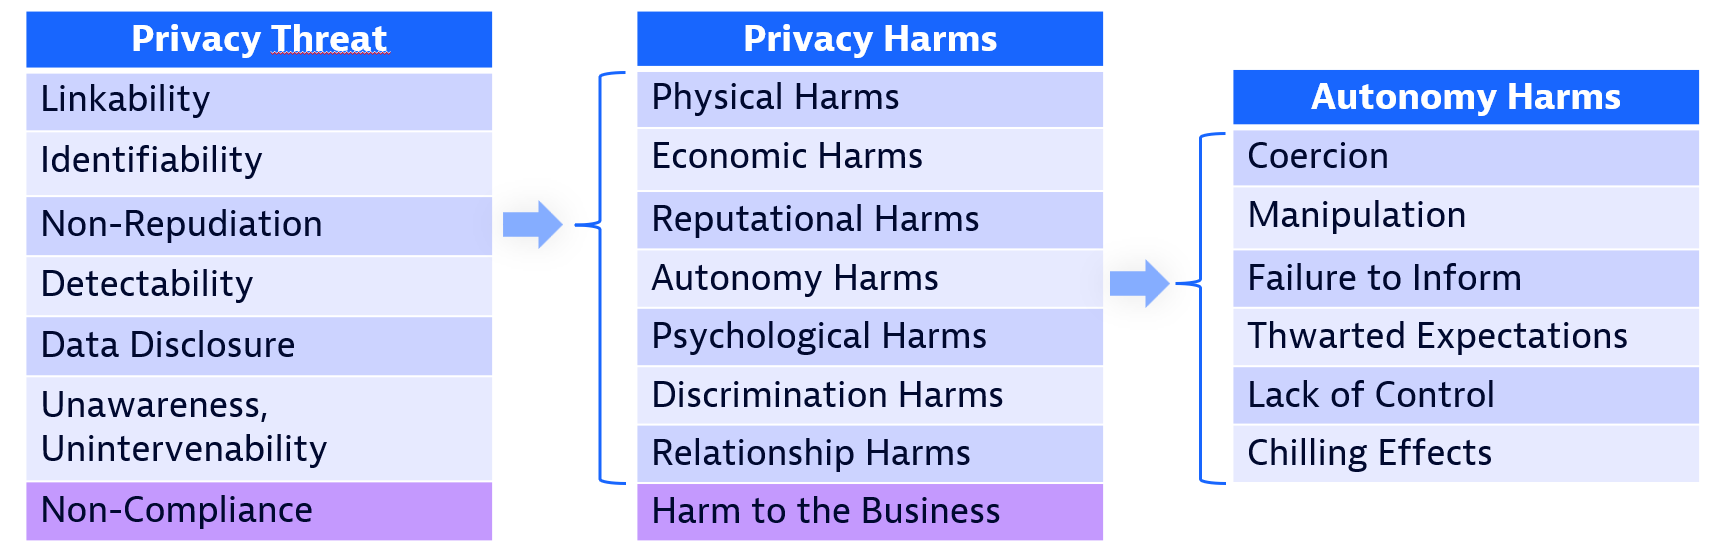 A diagram illustrating how a single LINDDUN threat could lead to privacy harms, specifically autonomy harms.